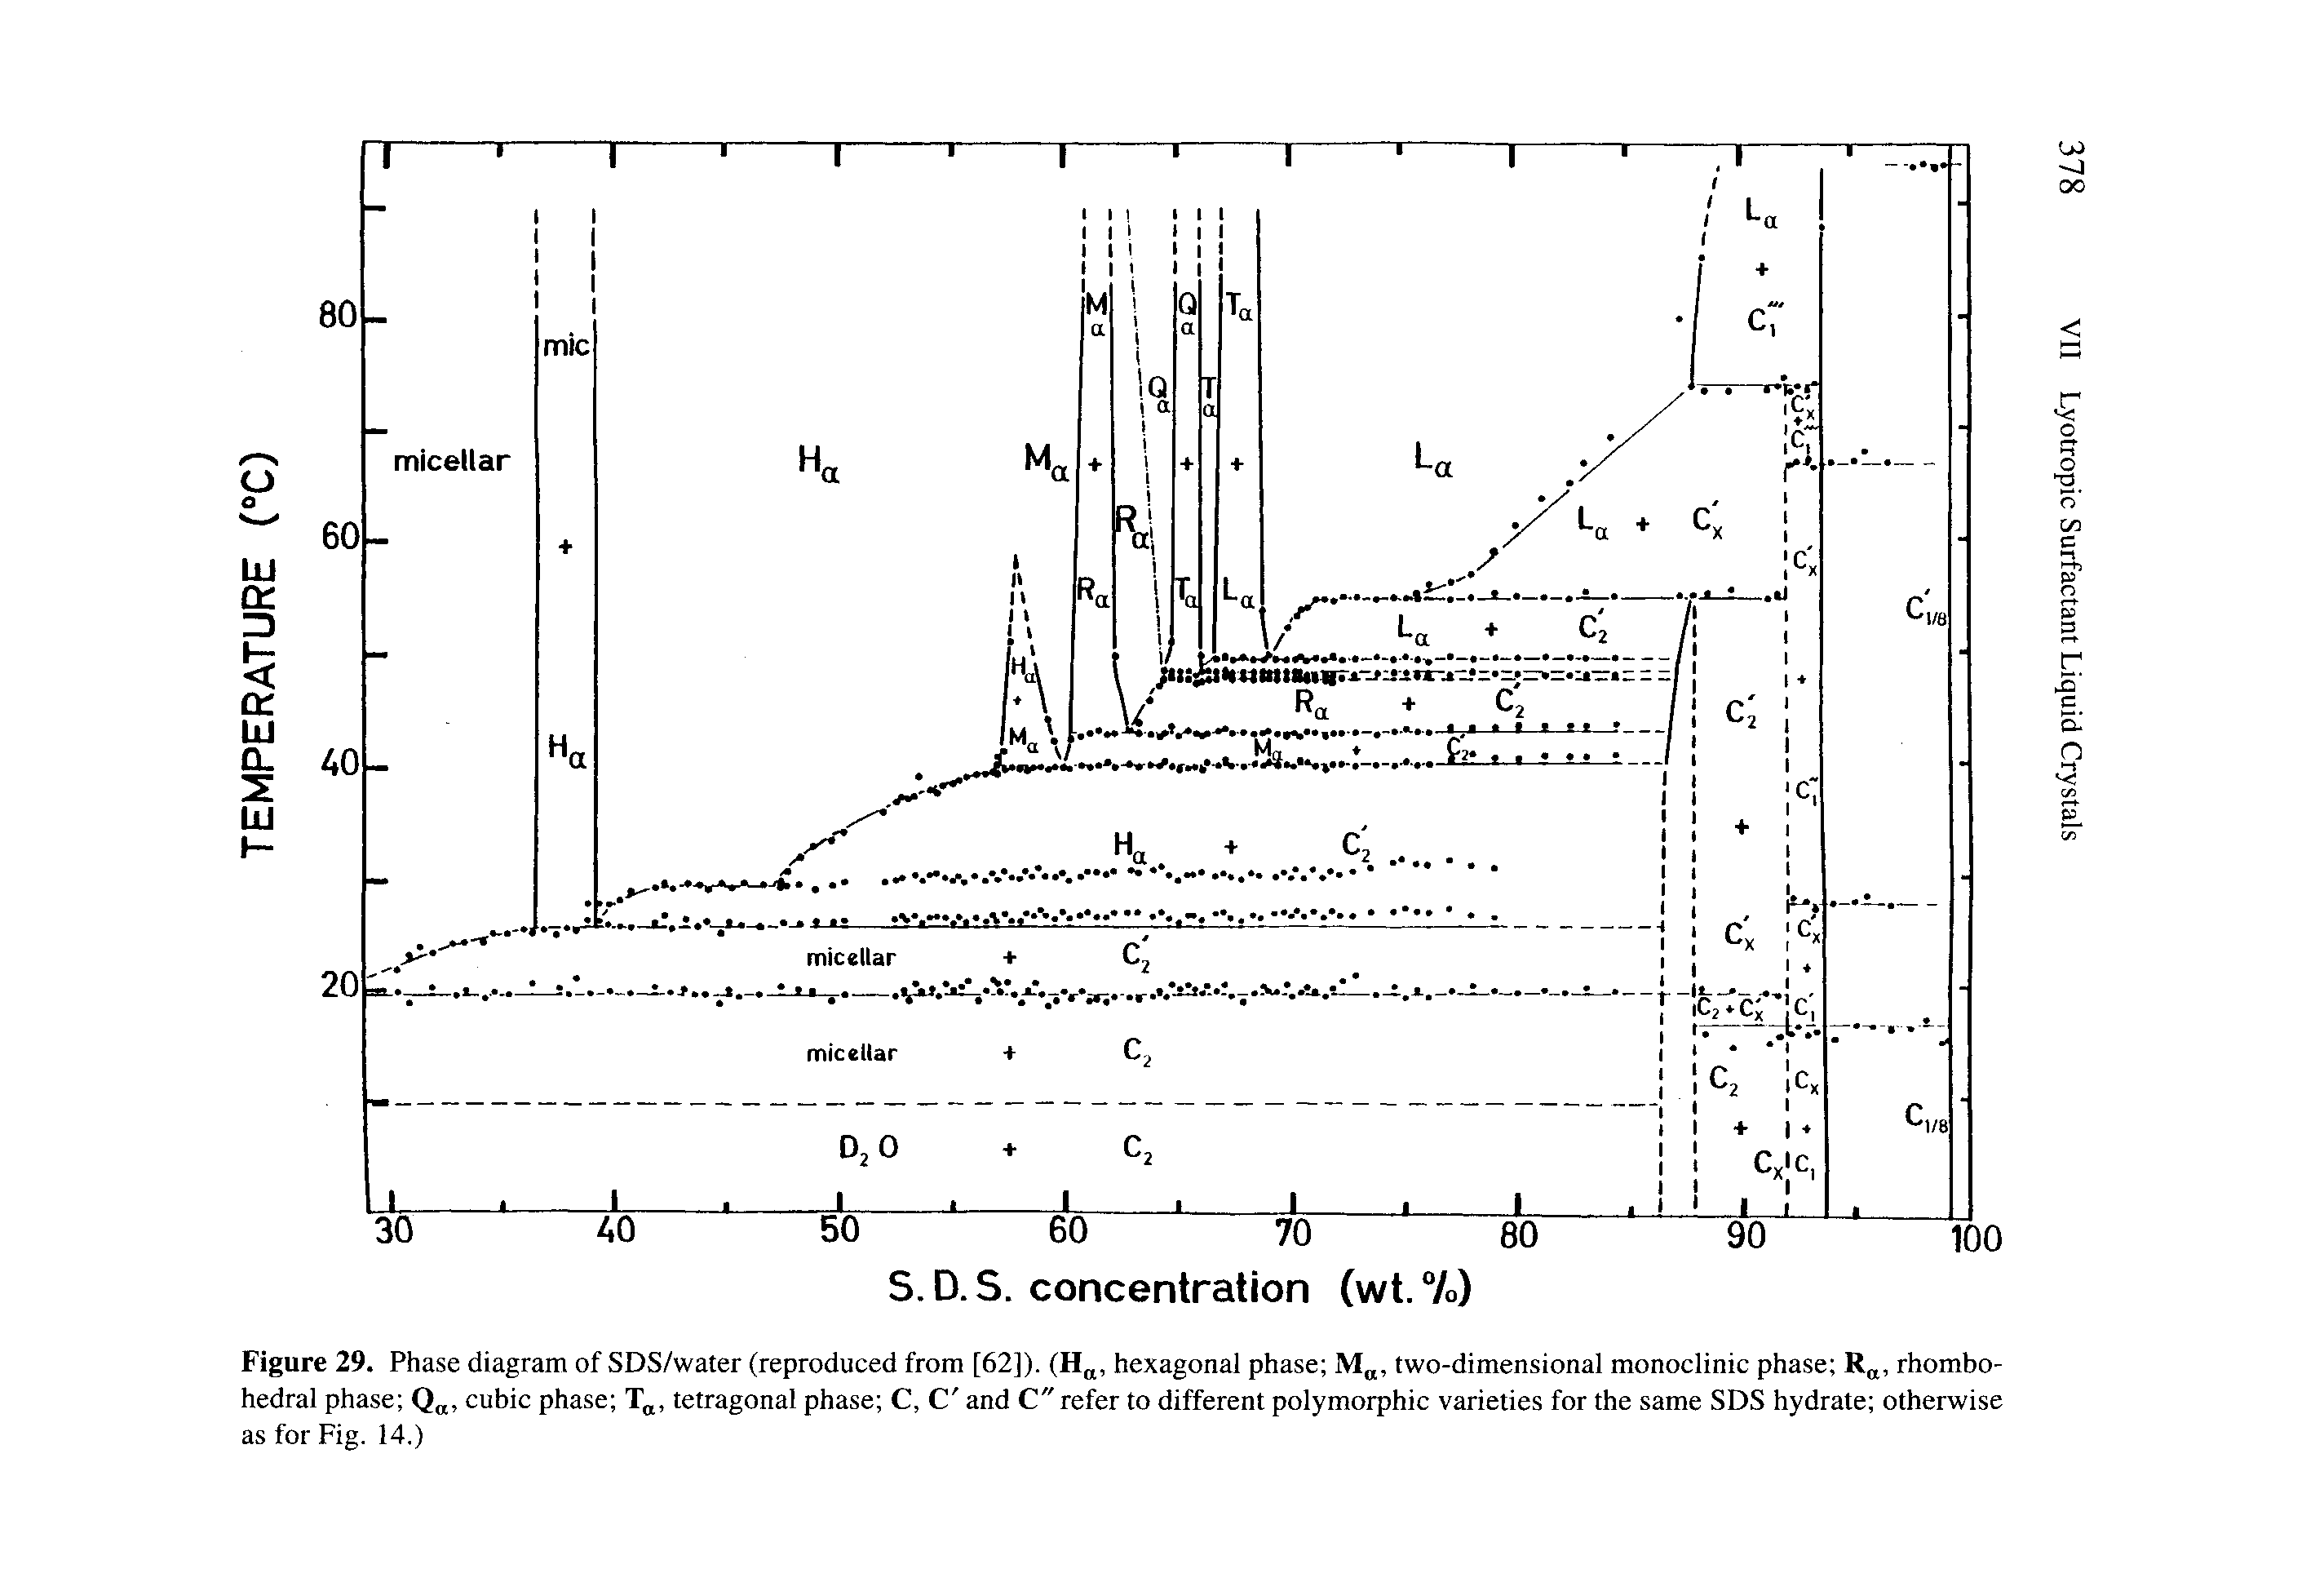 Figure 29. Phase diagram of SDS/water (reproduced from [62]). (H, hexagonal phase two-dimensional monoclinic phase rhombo-hedral phase cubic phase tetragonal phase C, C and C" refer to different polymorphic varieties for the same SDS hydrate otherwise as for Fig. 14.)...